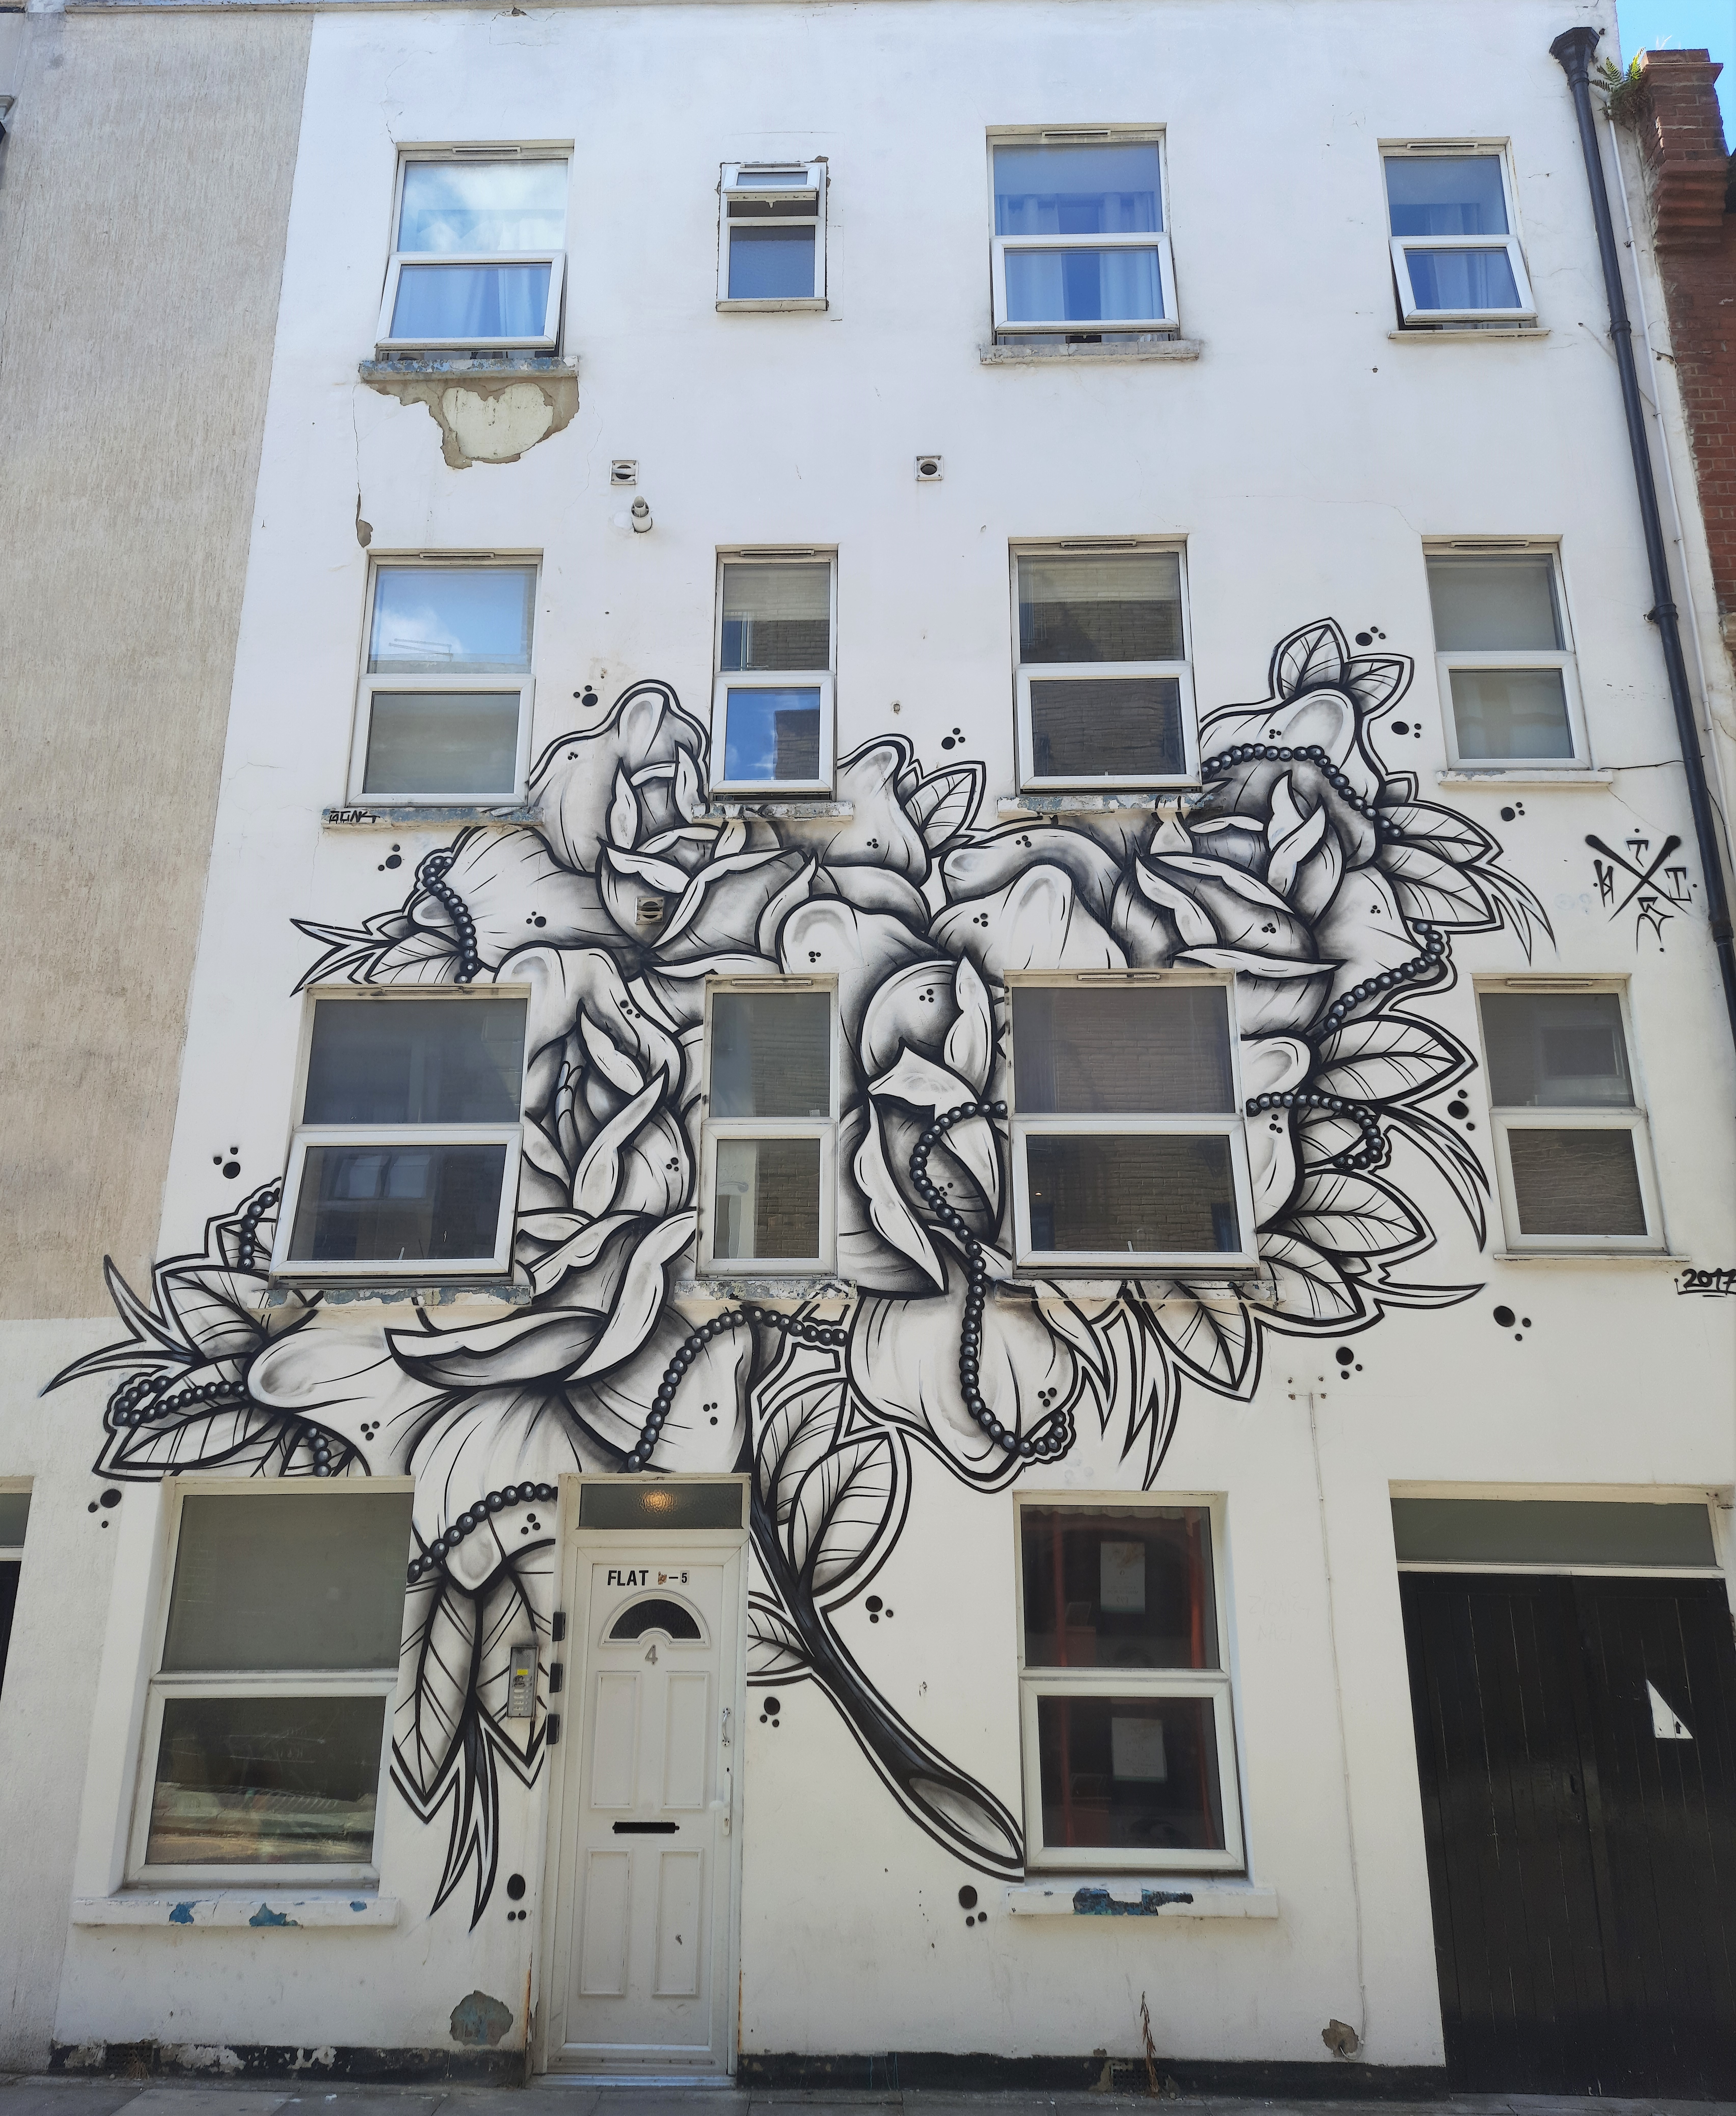 Graffiti 6555  by the artist ThisOne captured by Mephisroth in London United Kingdom